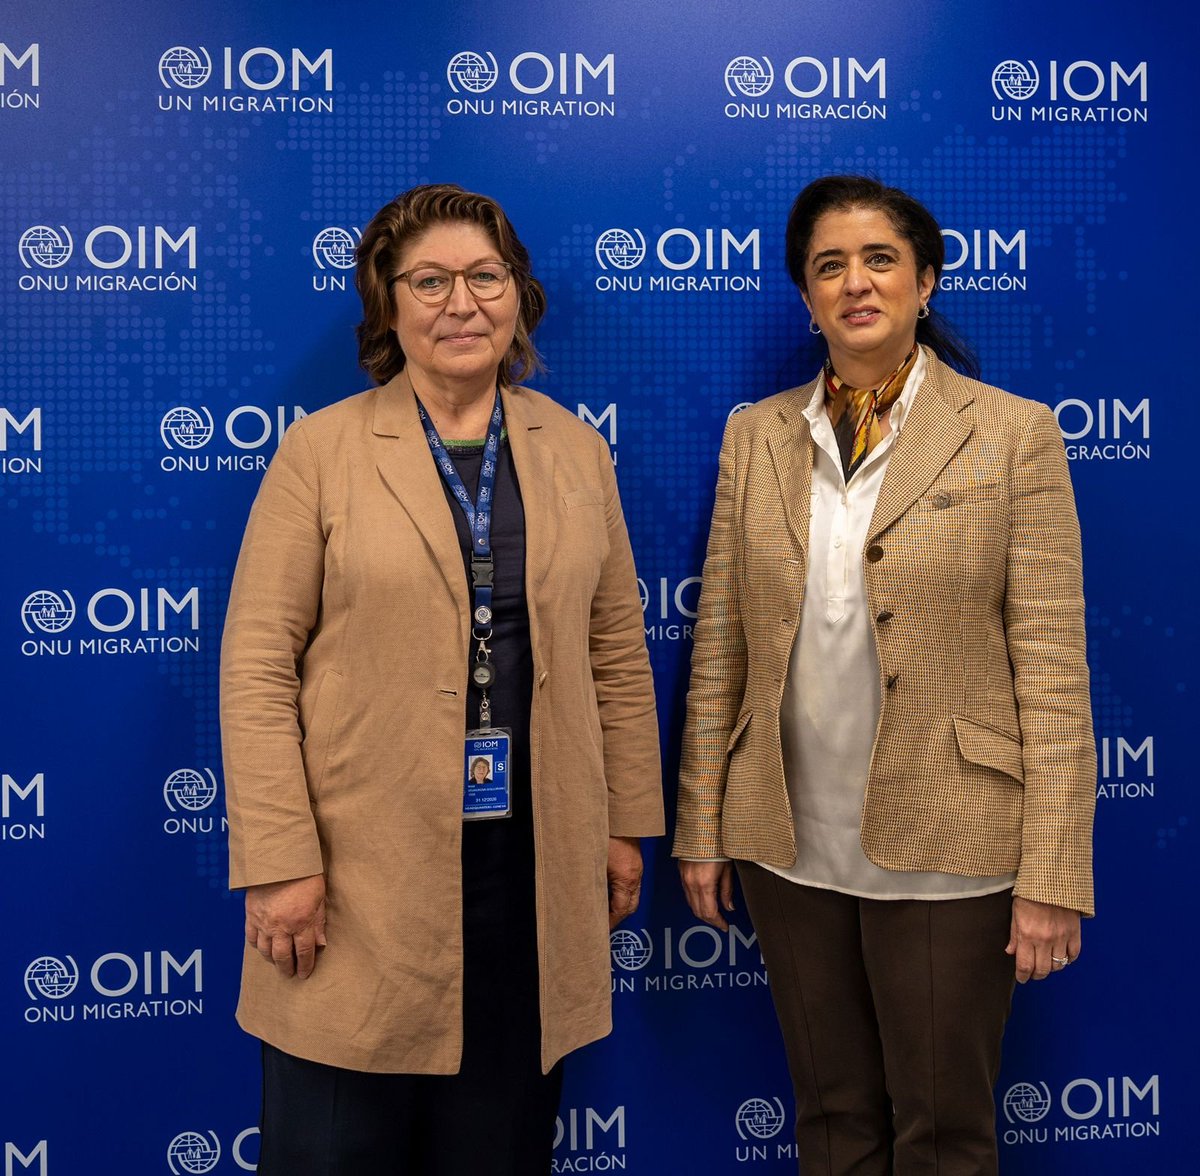 Thank you @IrenaVSollorano, Deputy Director General and @UNMigration team, for a very rich discussion on how we can harmonize our efforts to: ➡️ enhance equitable access to health supplies and the inclusion of internally displaced populations & migrants in health care; ➡️